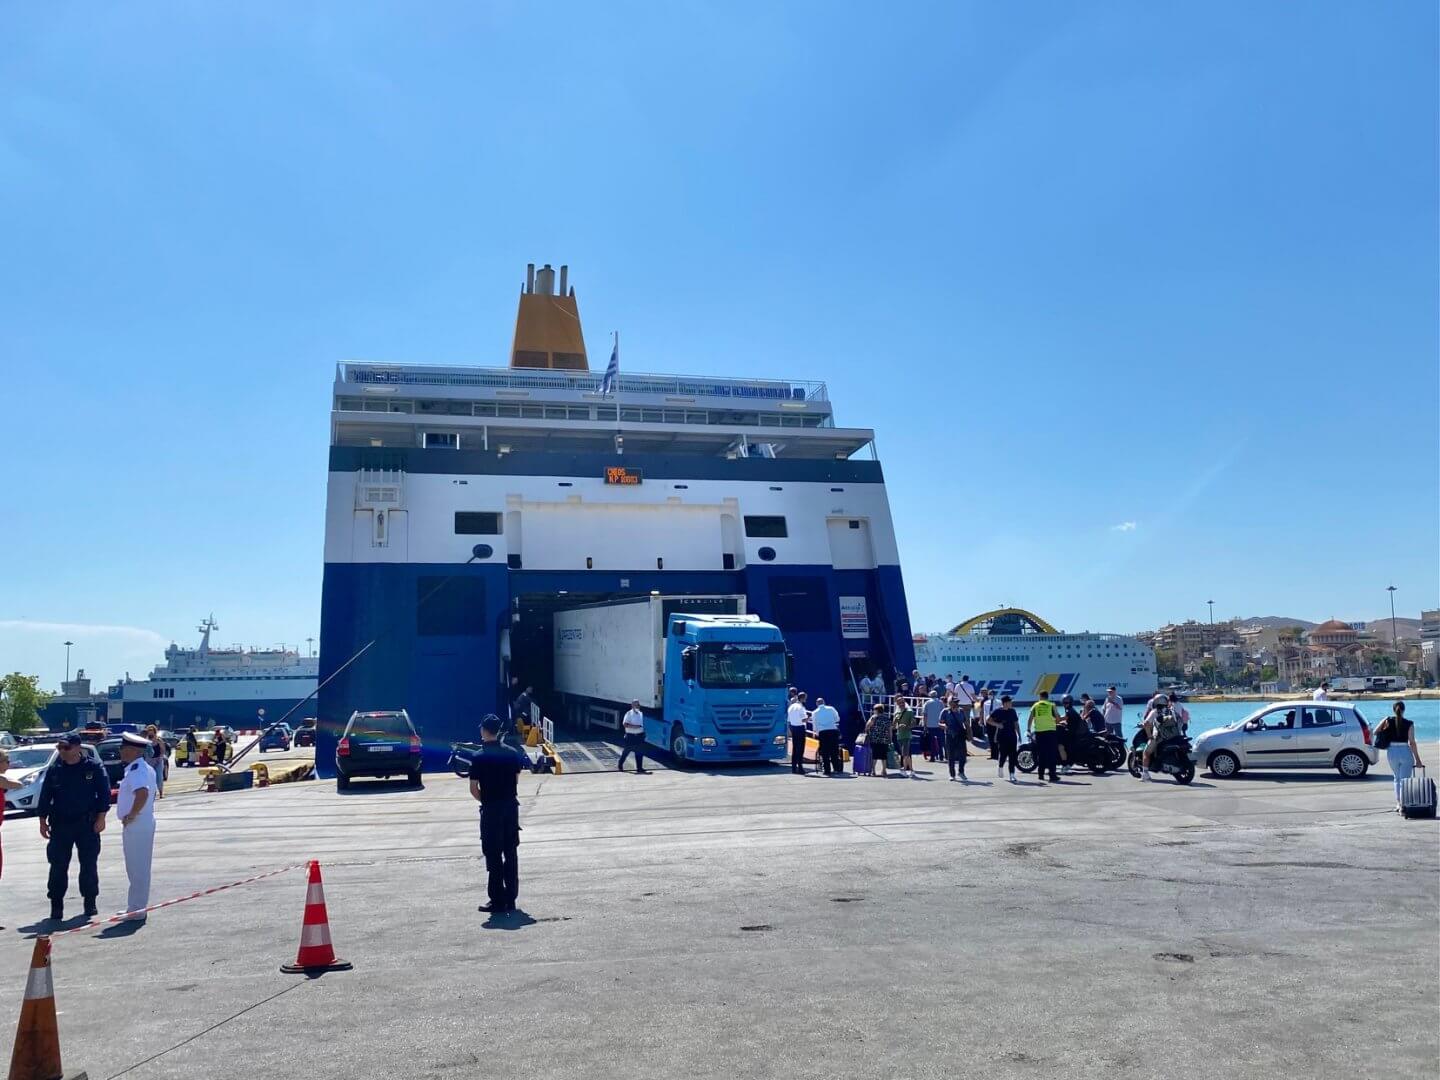 Passengers and vehicles being loaded onto a Blue Star ferry at Piraeus Athens